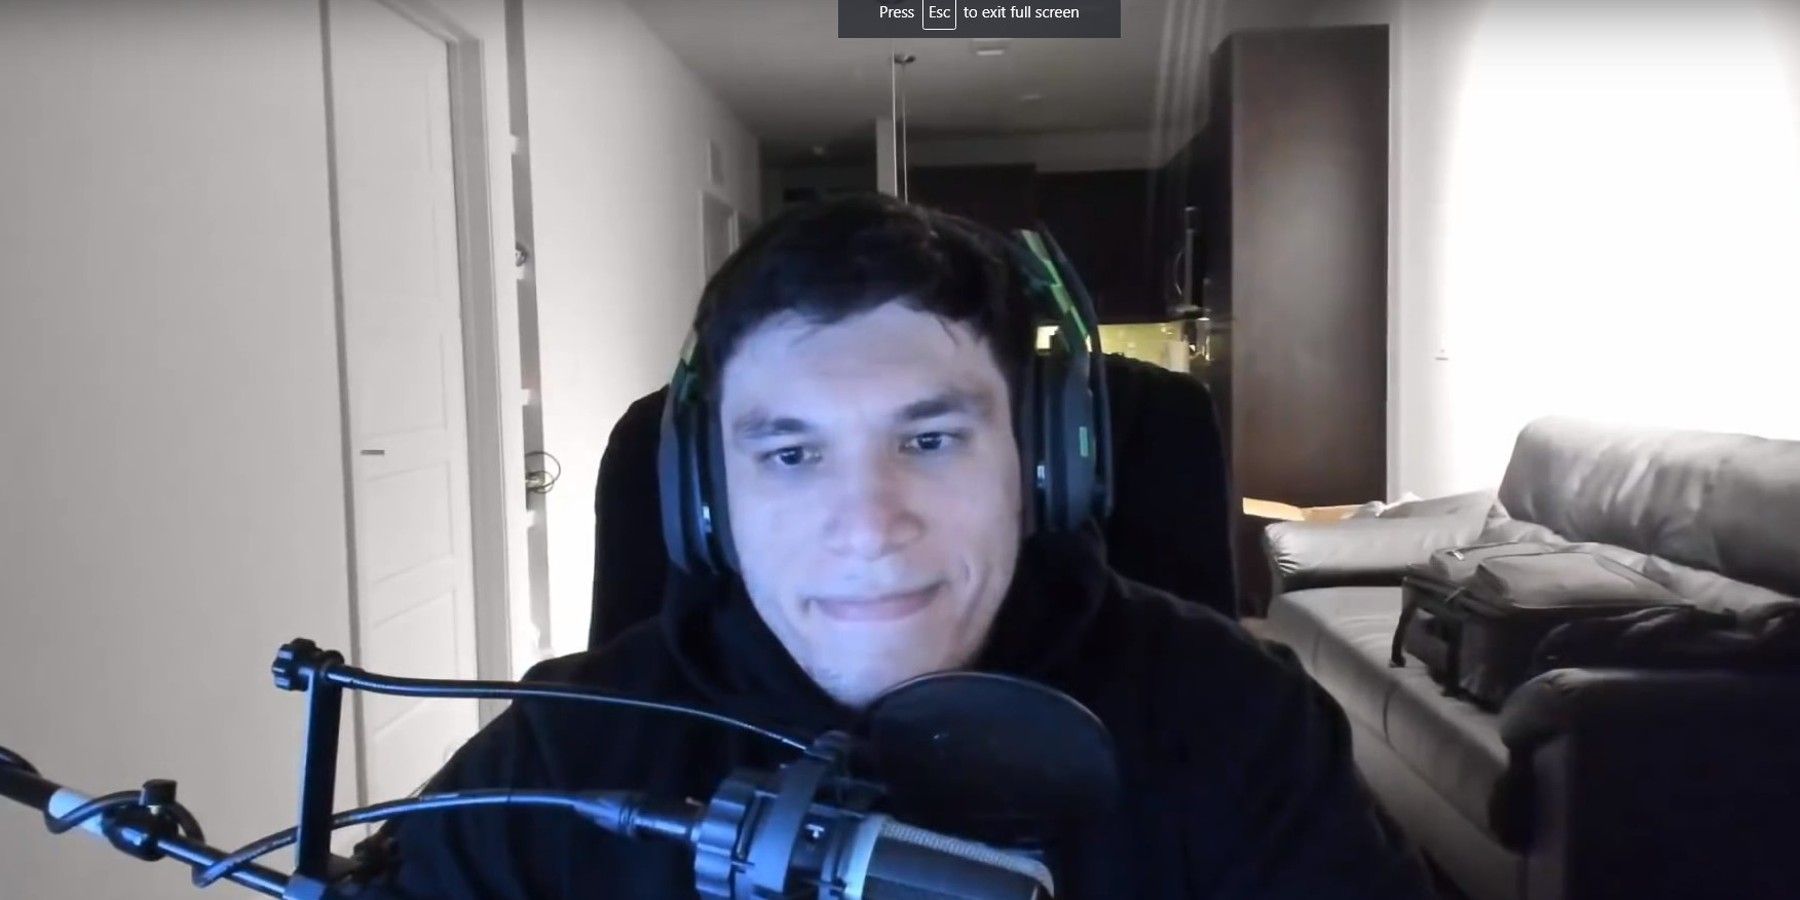 Trainwrecks Criticizes Ea After Being Banned From Nickmercs Apex Legends Tournament